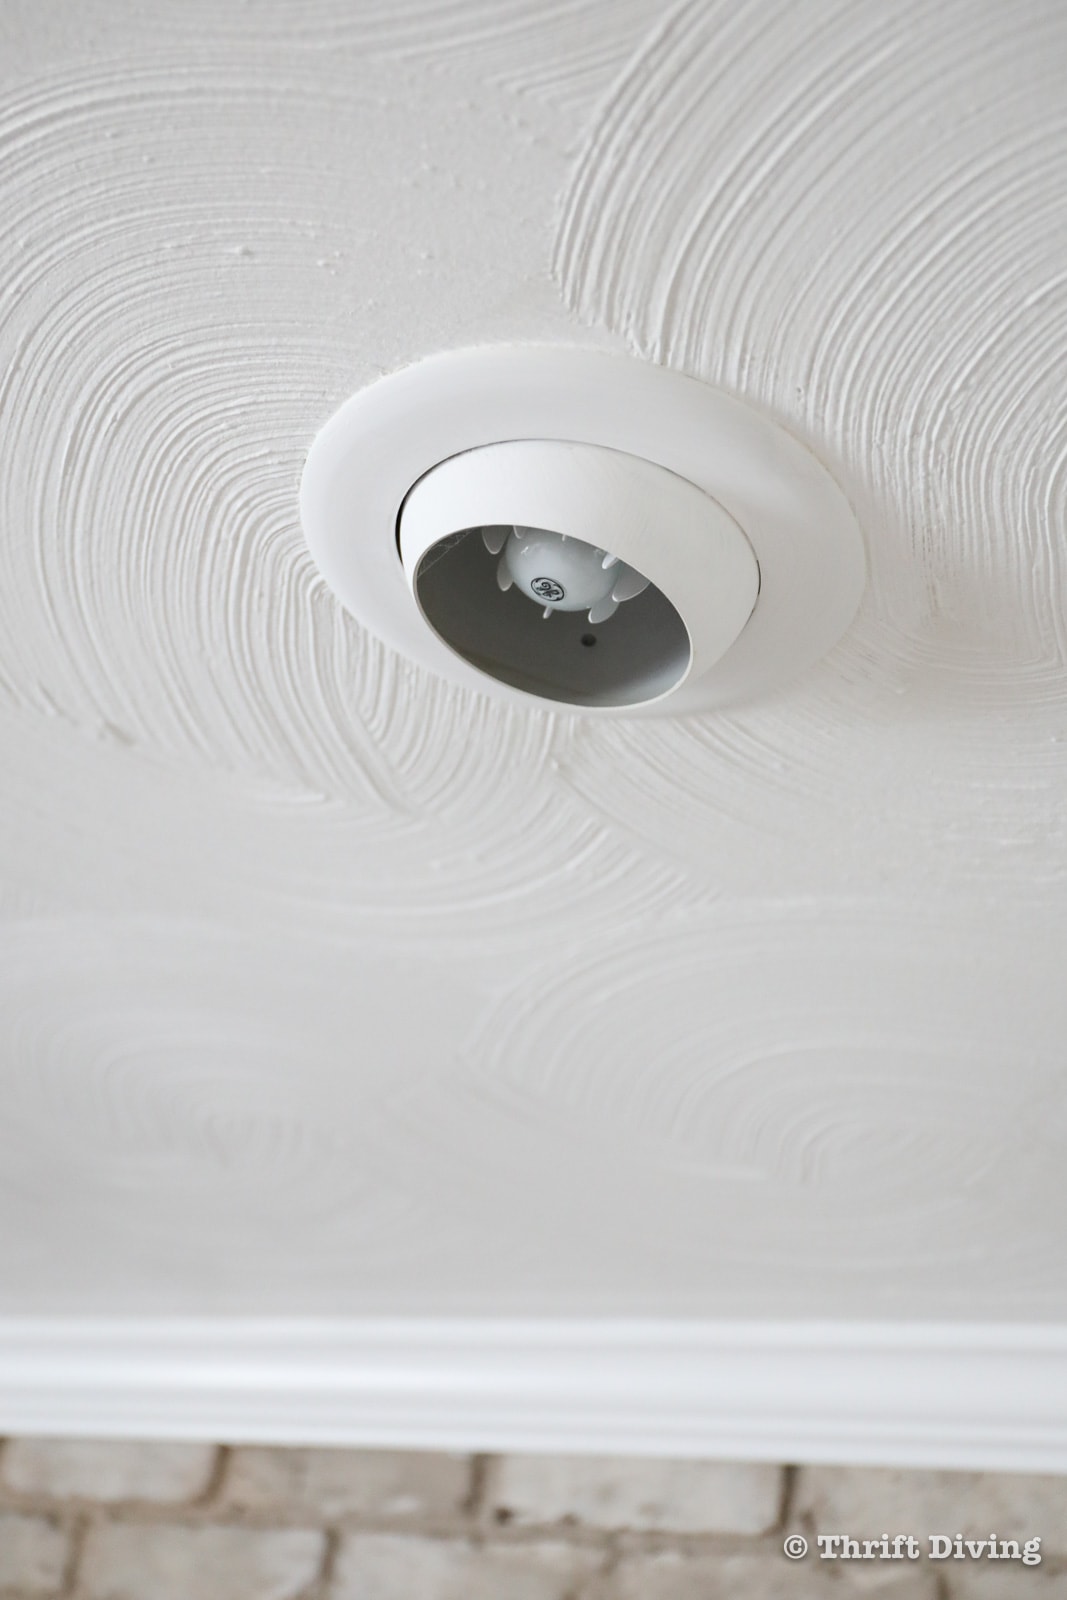 Recessed Lights and How to Retrofit Them with Clips for LED Downlights - Thrift Diving